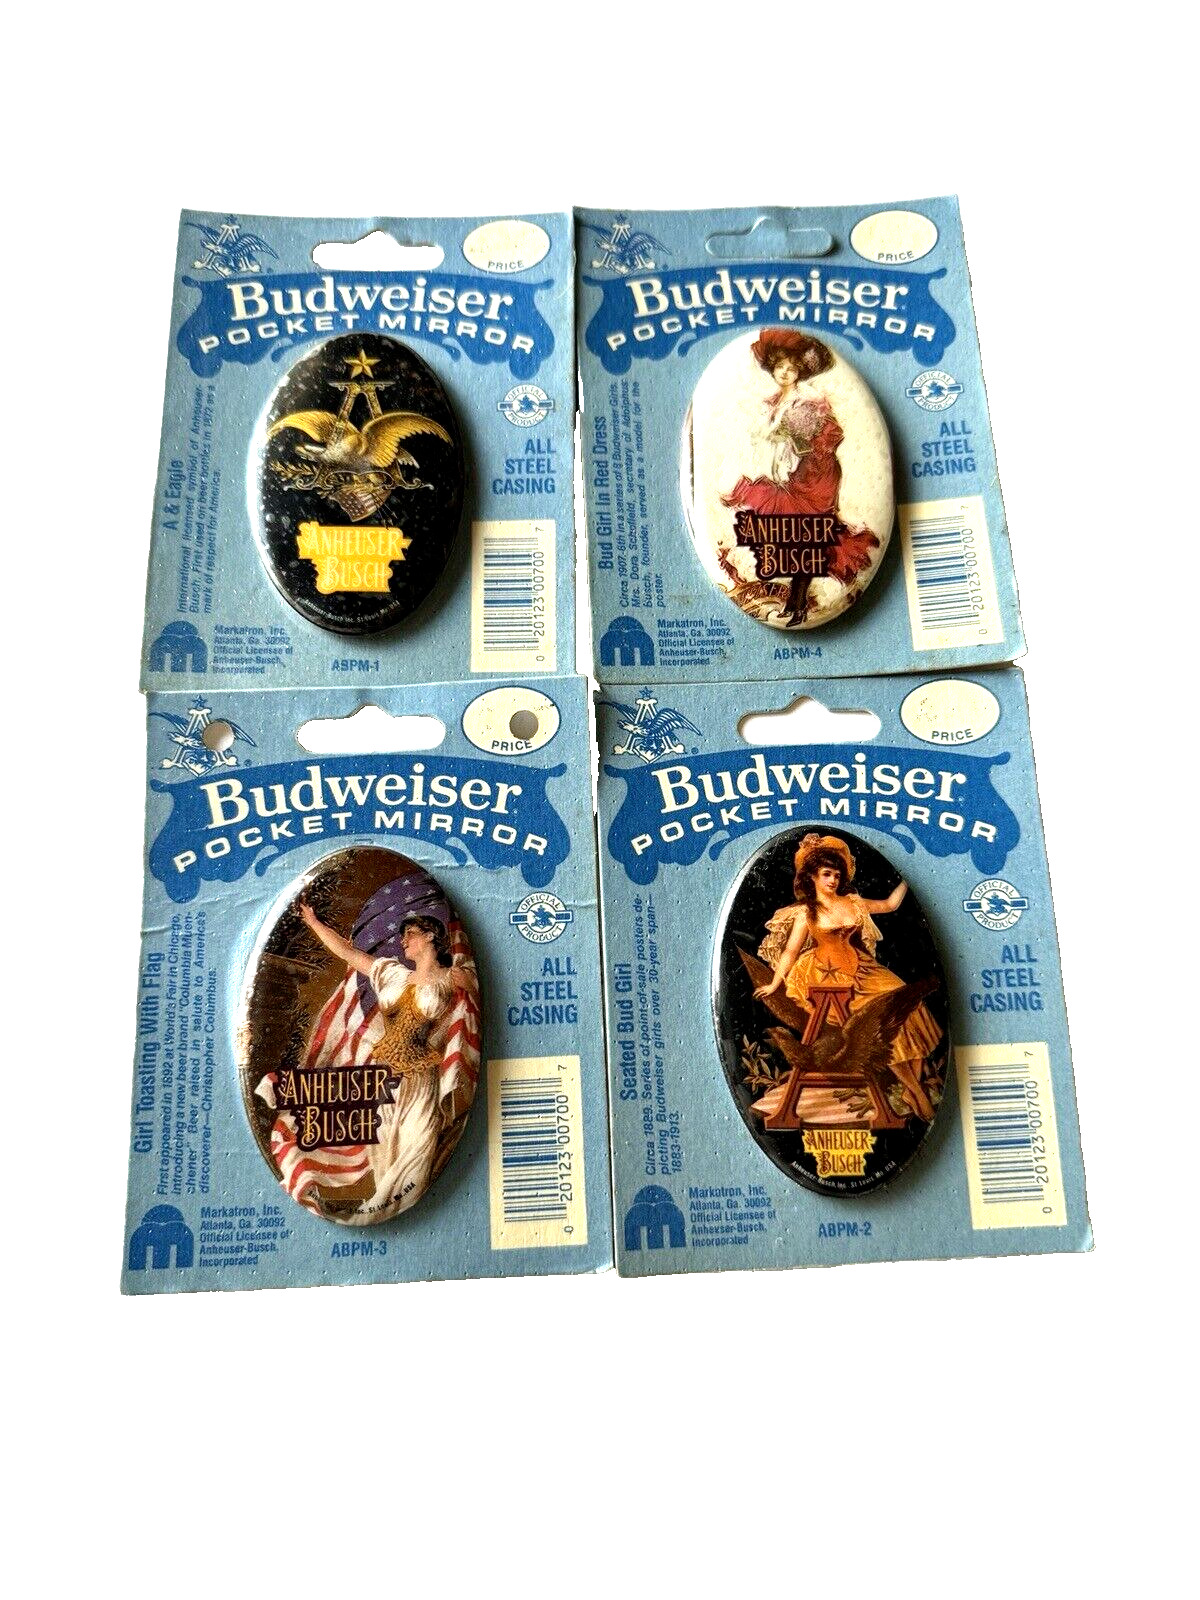 4 Vintage Budweiser Pocket Mirrors Official Product New in Package